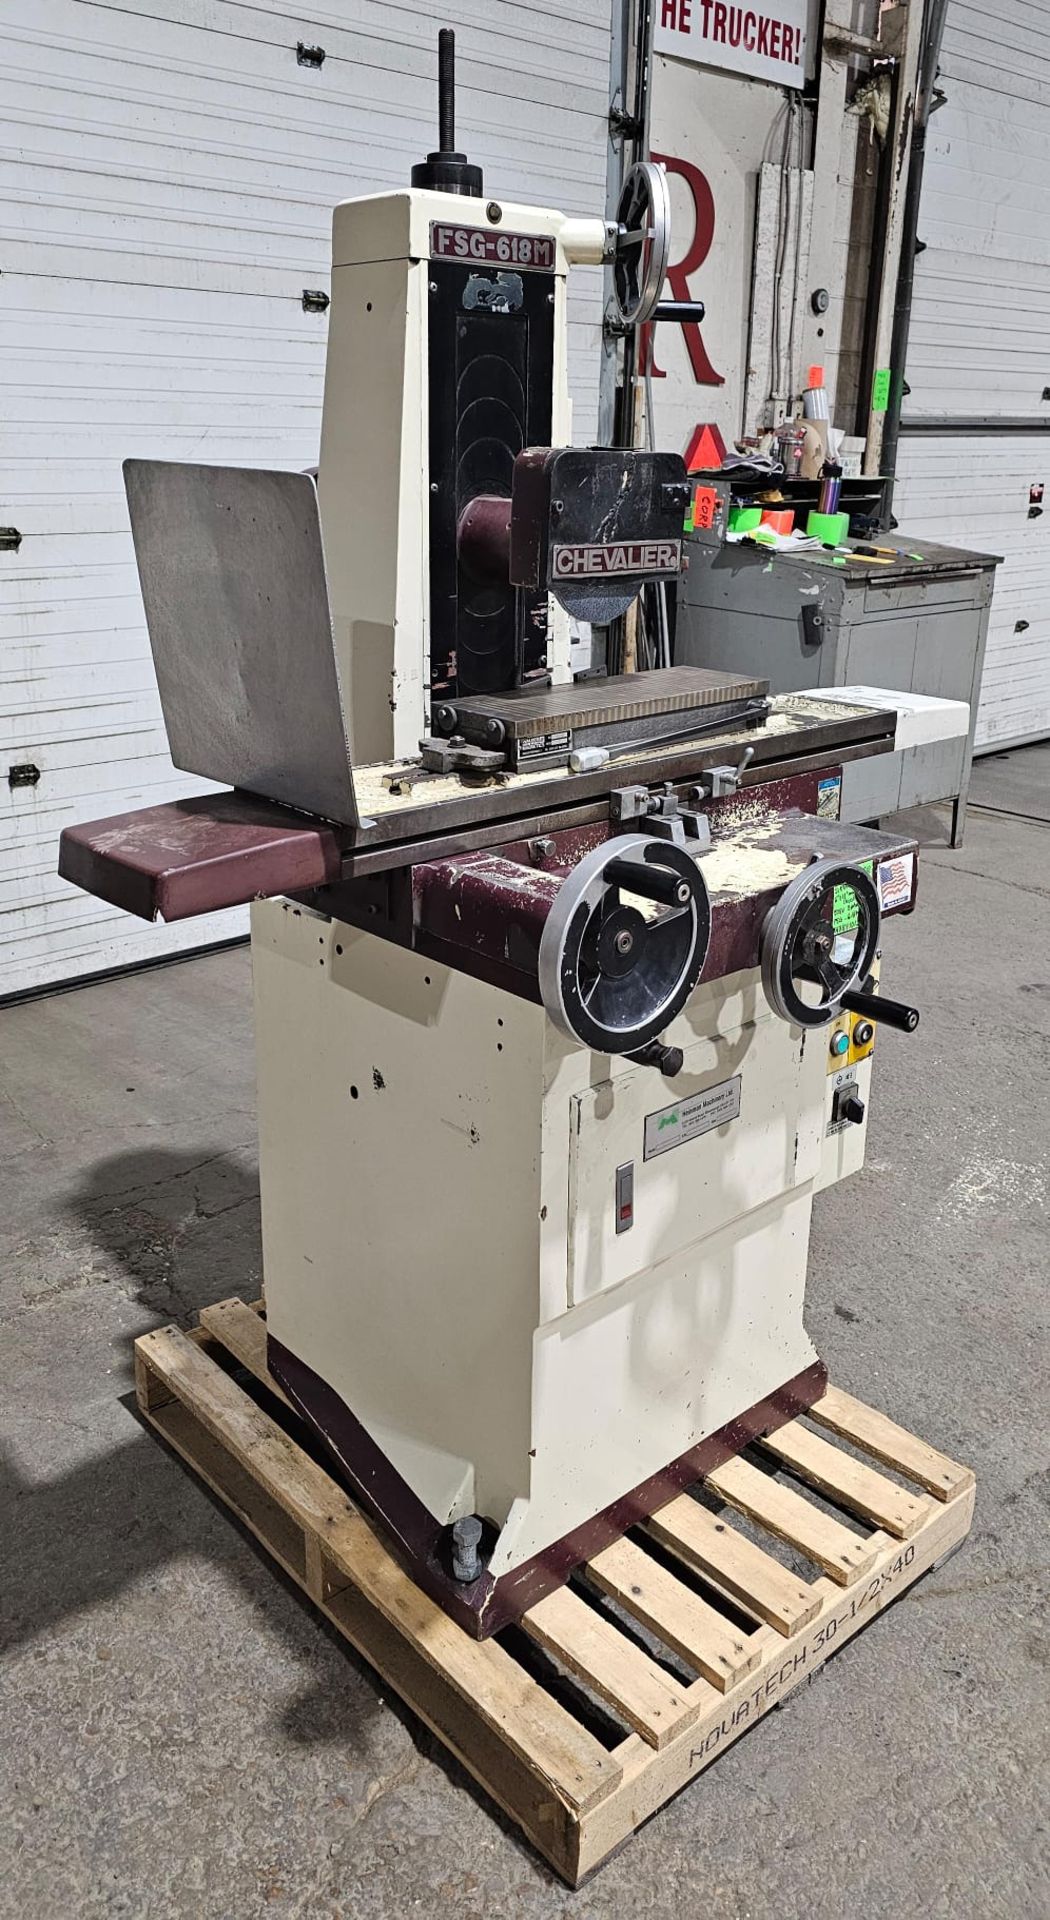 CHEVALIER Hydraulic Surface Grinder 18" x 6" Magnetic Chuck model: FSG-618M serial: a3891012 575v - Image 6 of 6